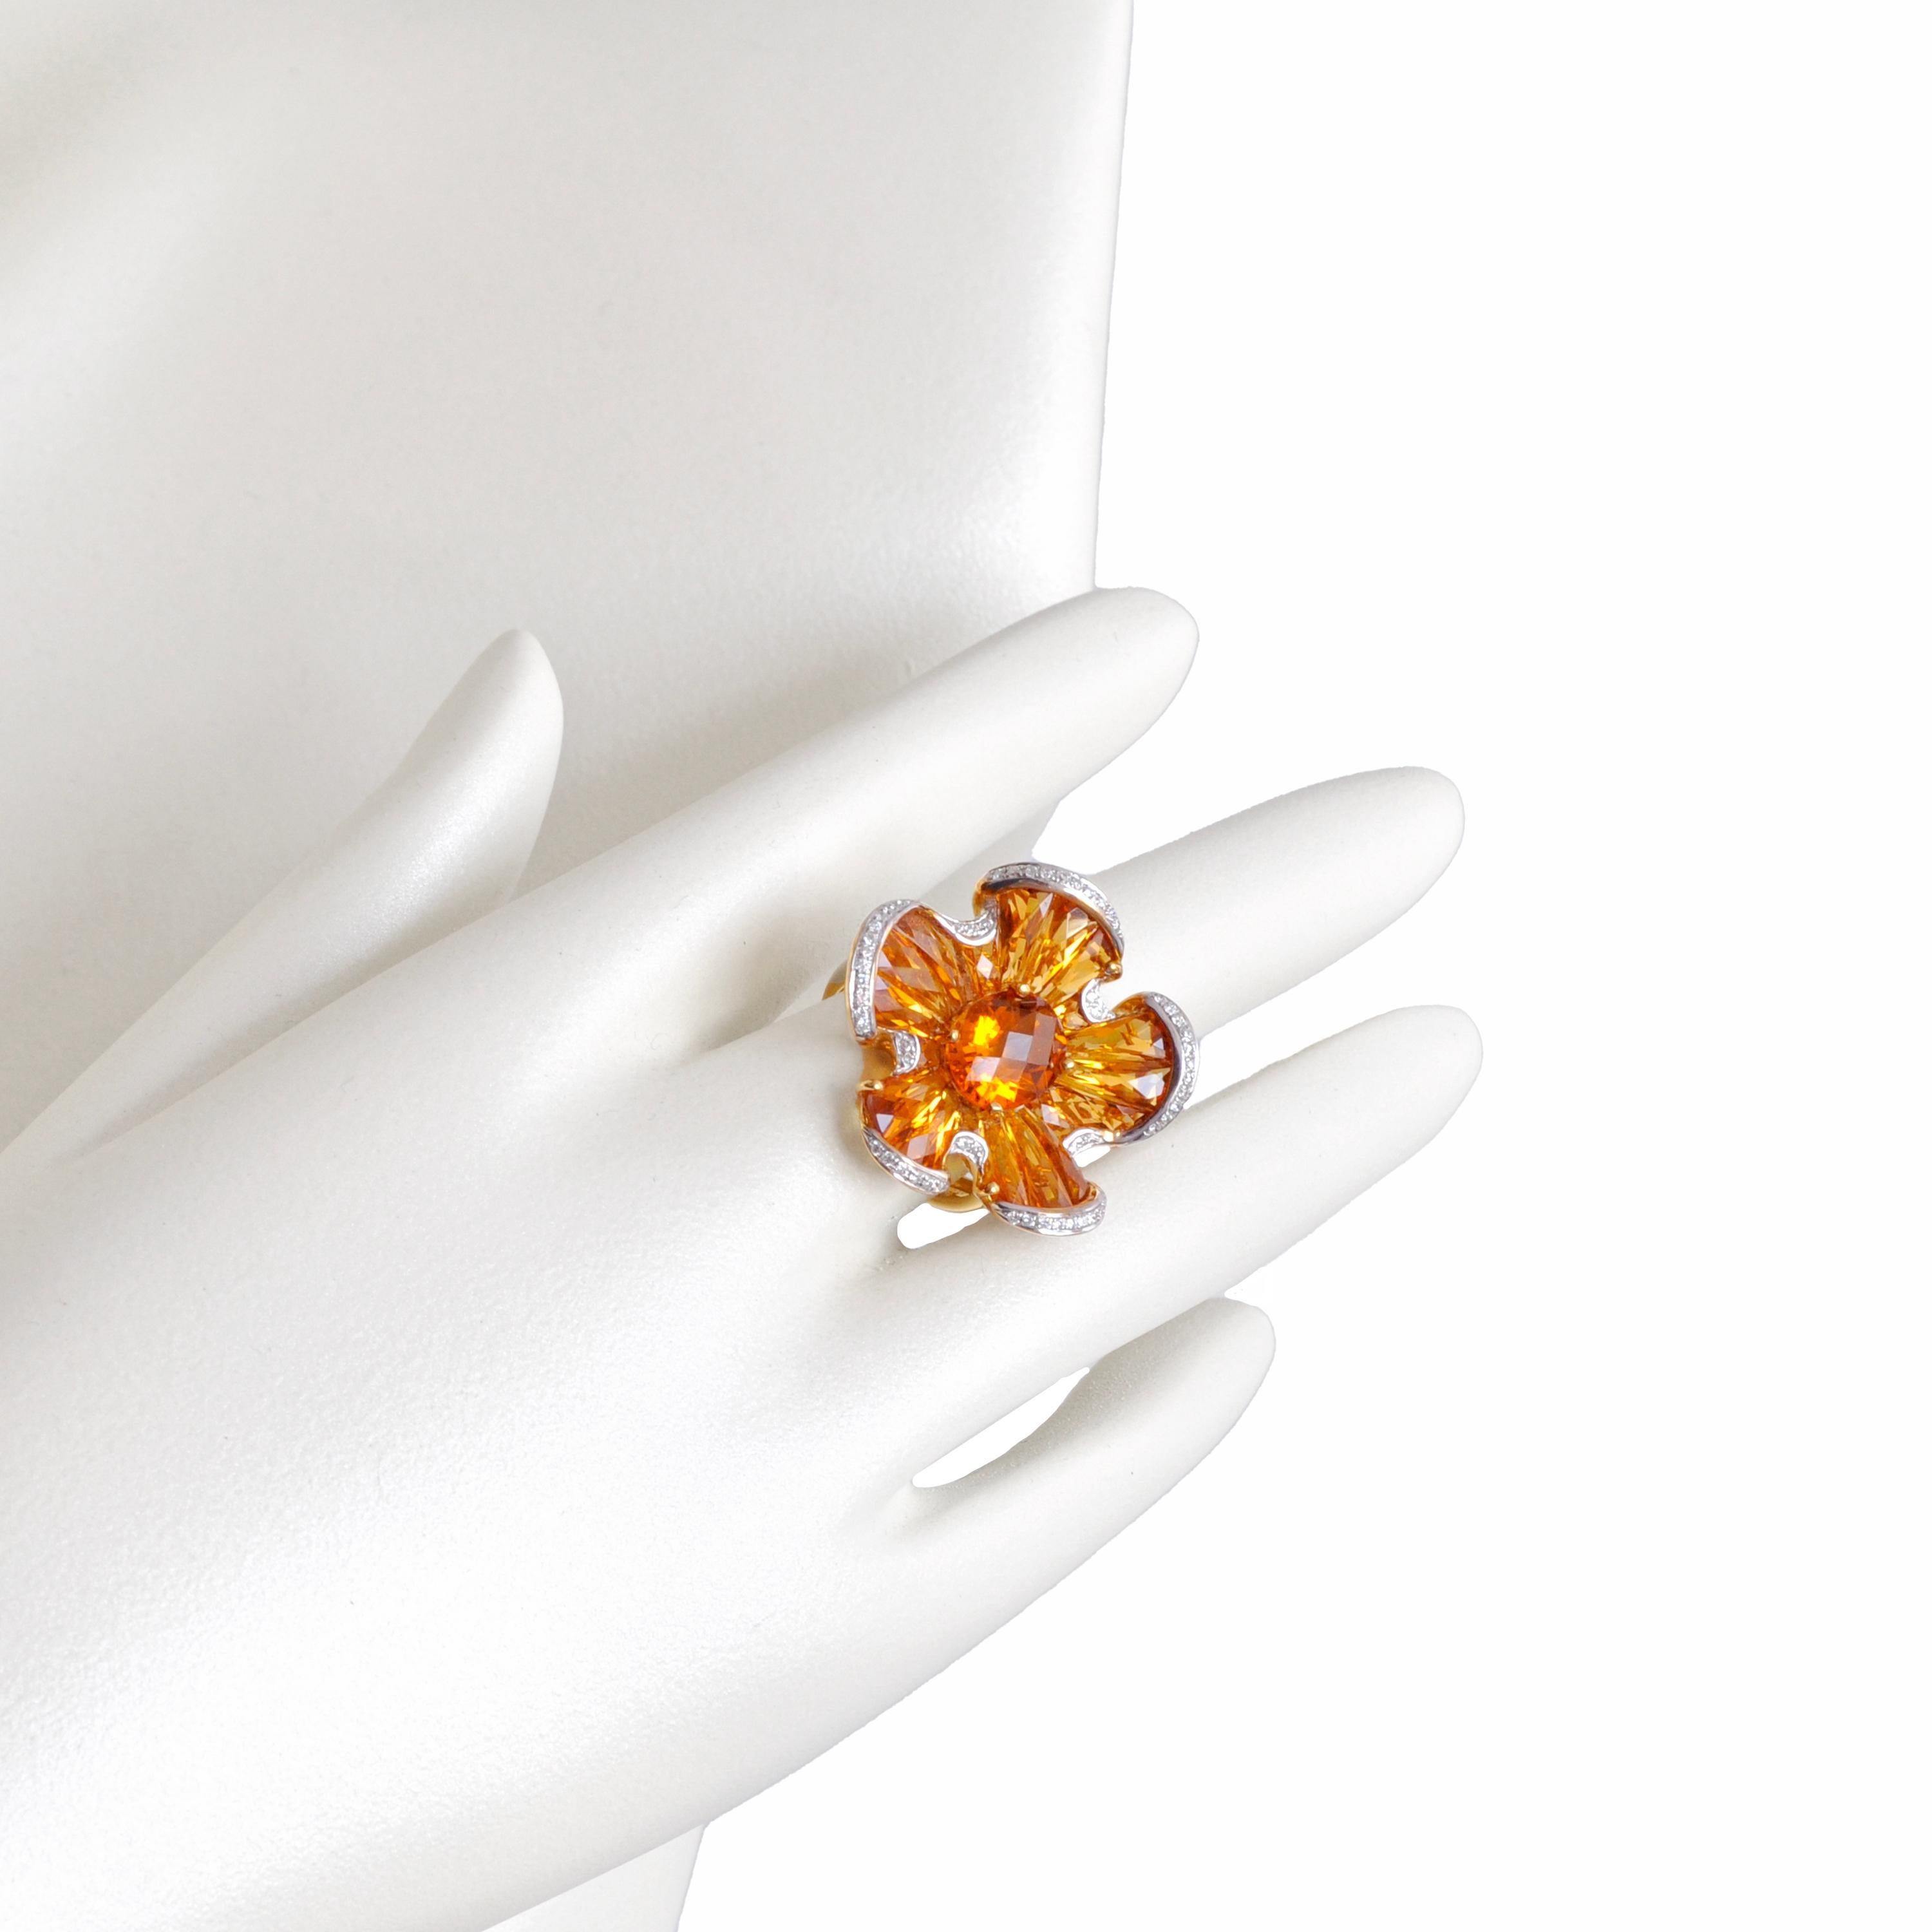 Elegance at its best, this citrine floral ring is a radiant and singularly beautiful piece that captures the essence of luxury and style. Crafted in elegant 18 karat gold, this ring showcases a prong-set citrine at its center, radiating warmth and